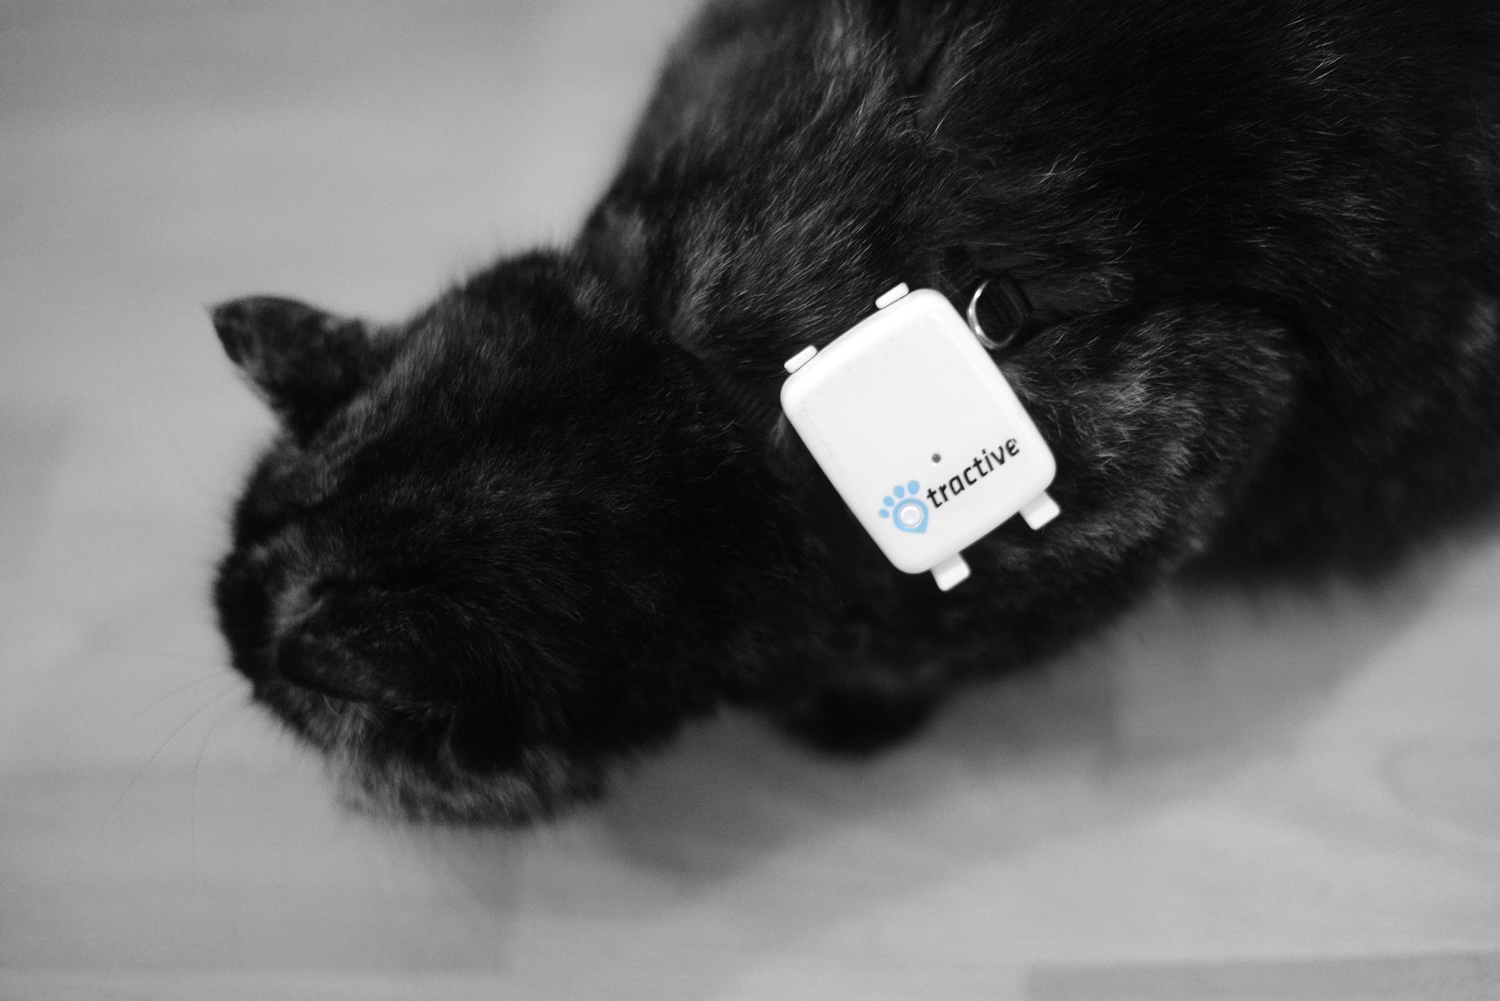 Tractive GPS Pet Tracking